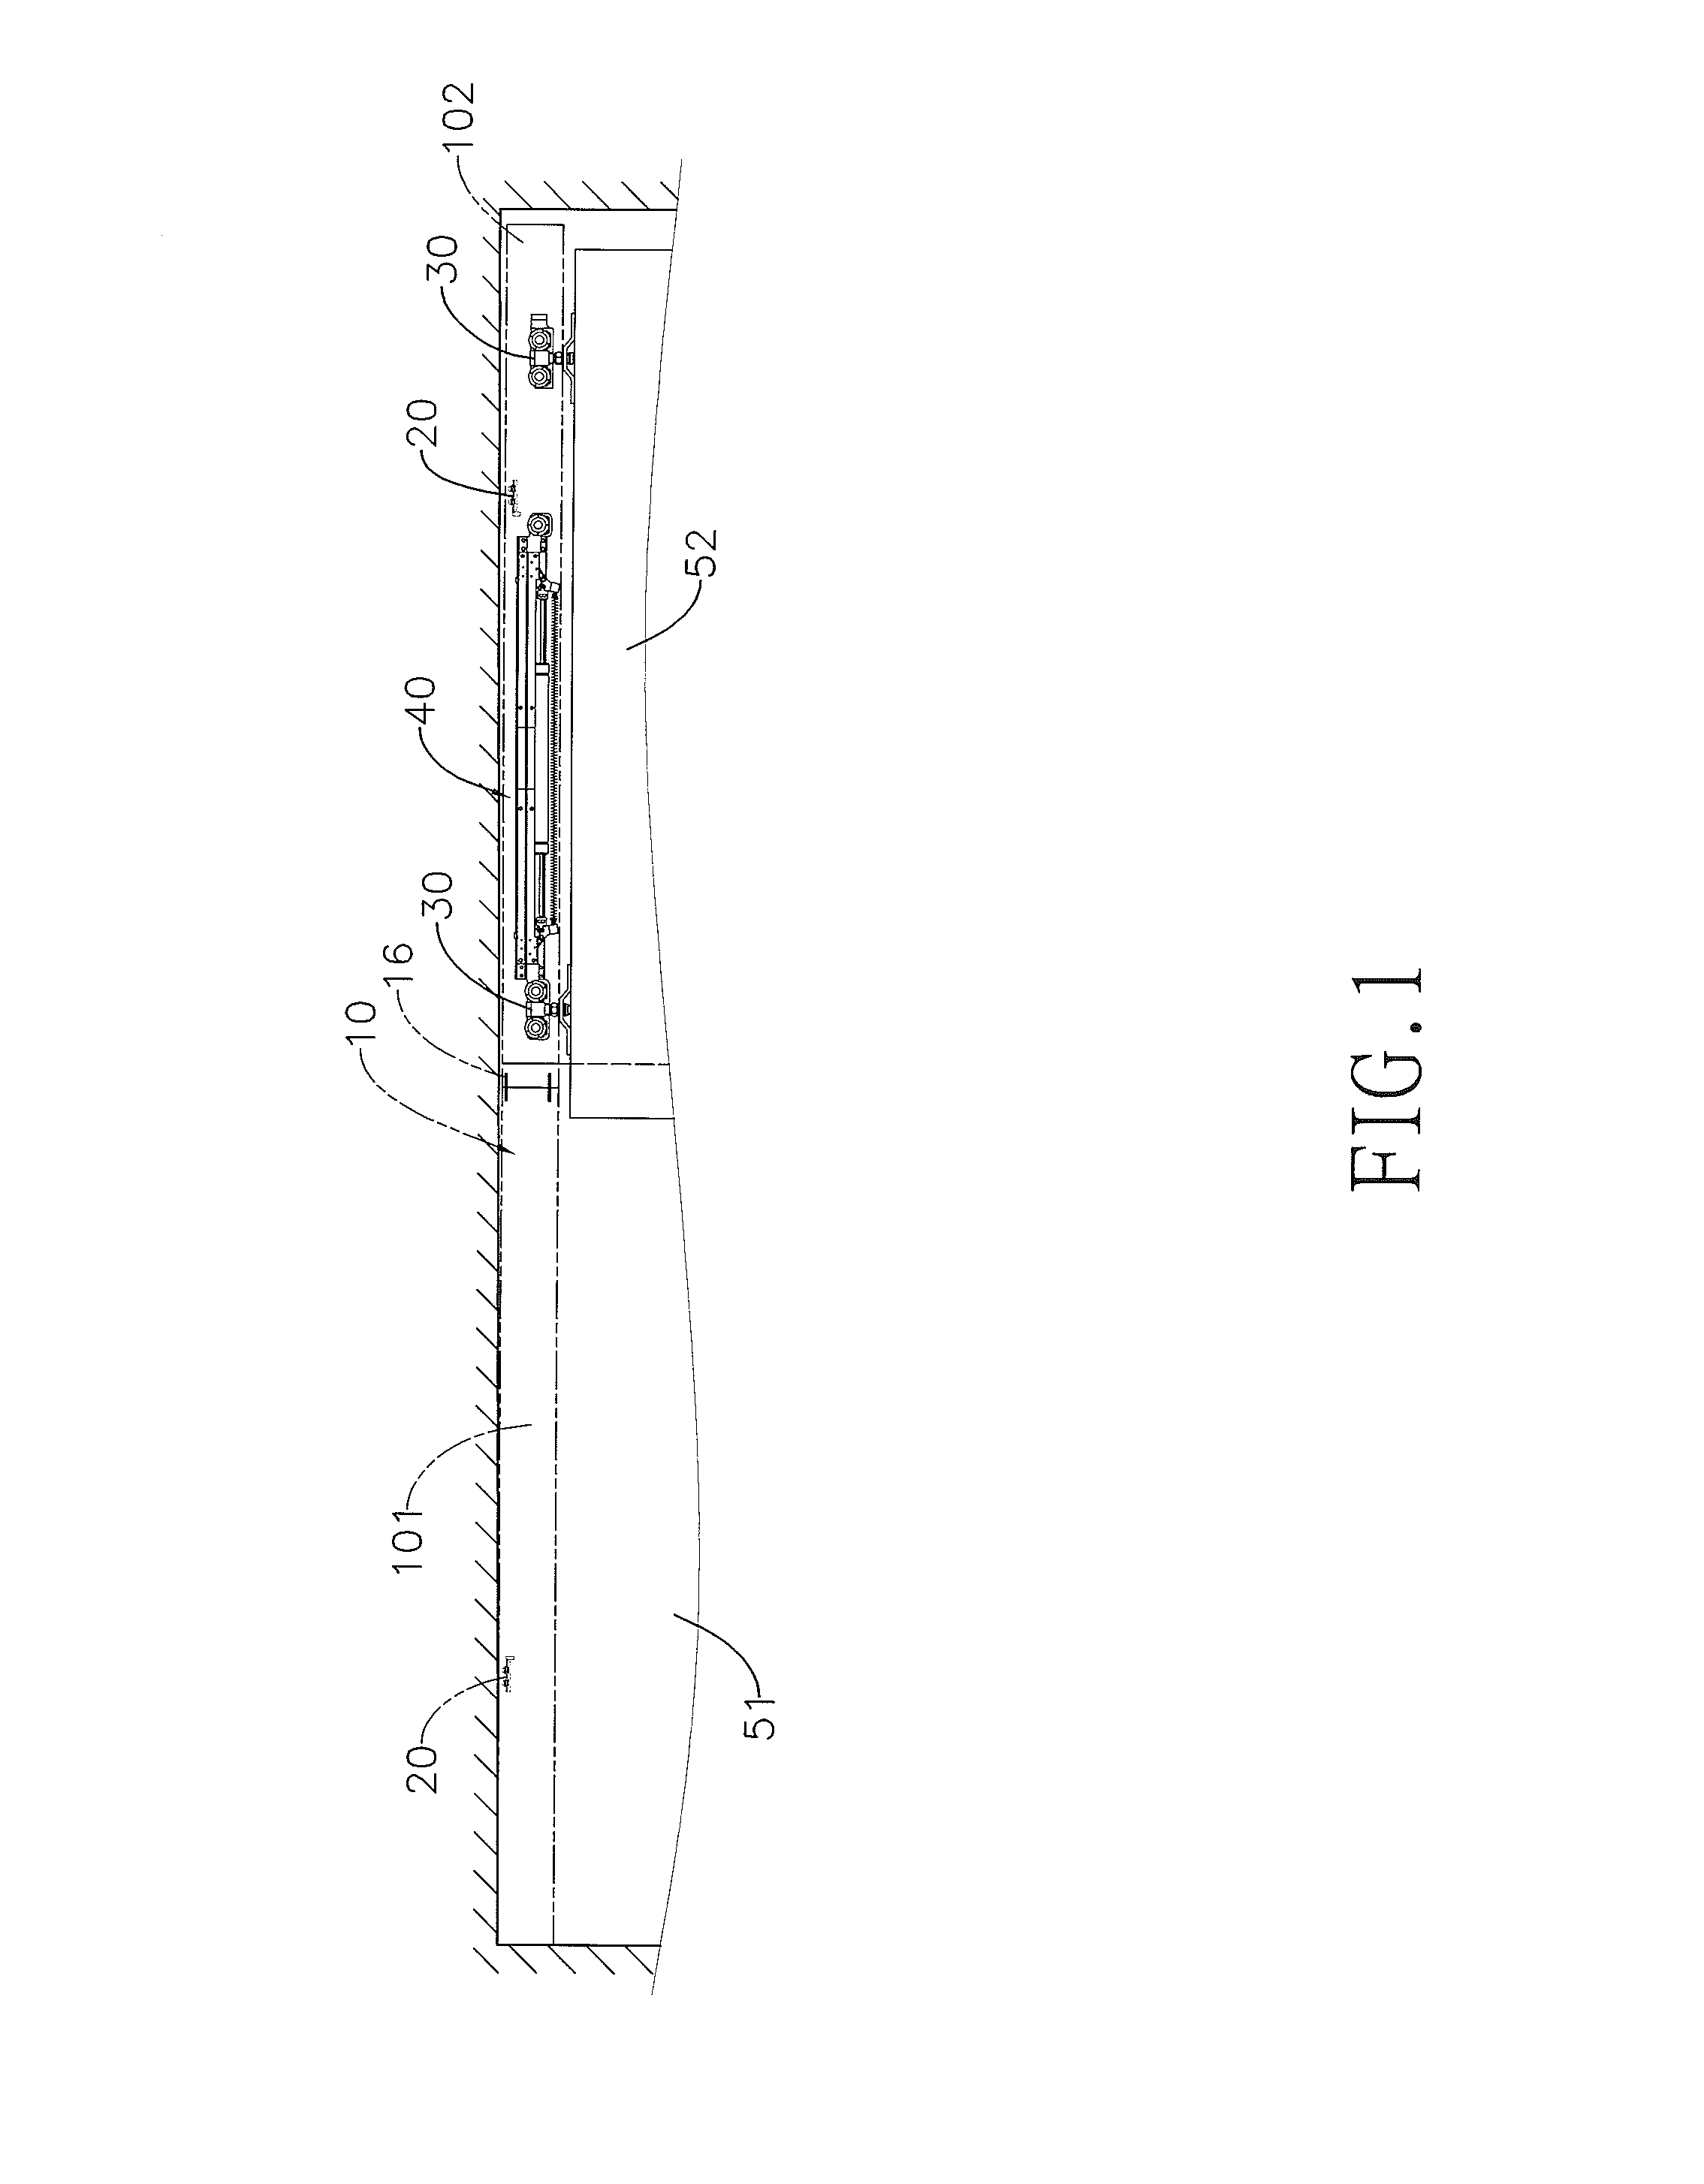 Two-way Soft Closing Device for a Sliding Door and Soft Closing Activation Trigger Assembly Thereof